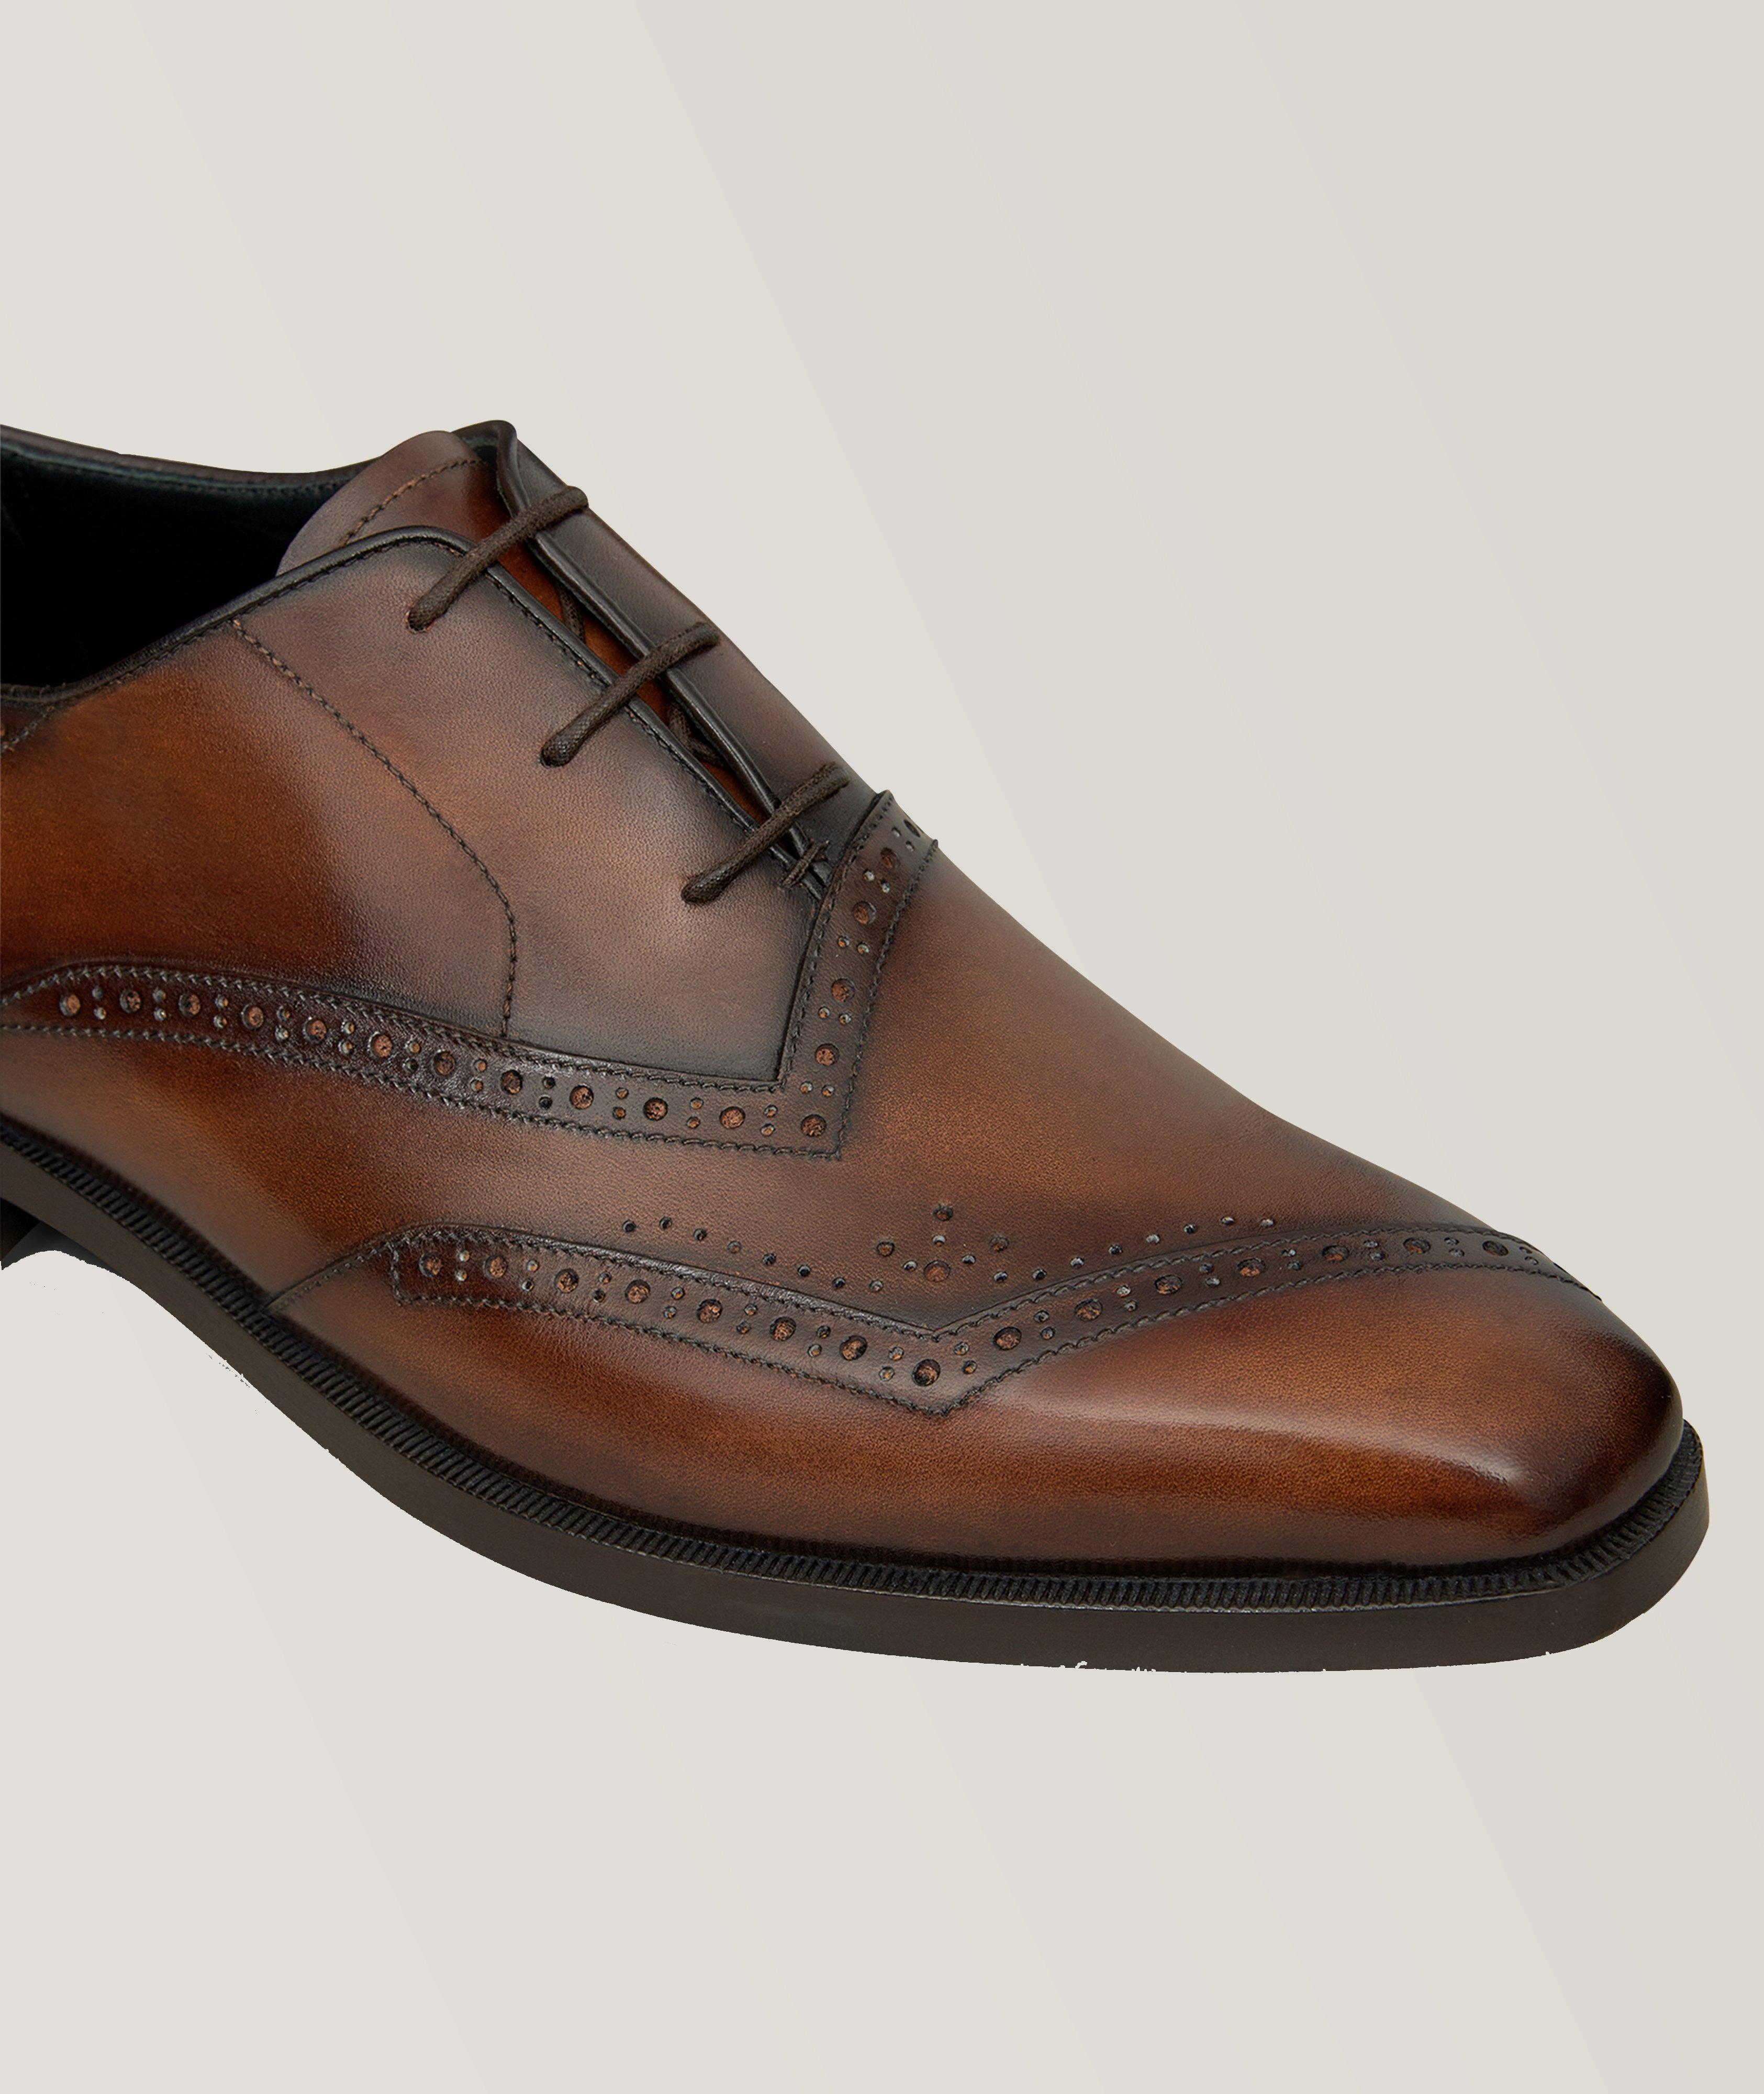 Asymmetric Broque Leather Oxford  image 5